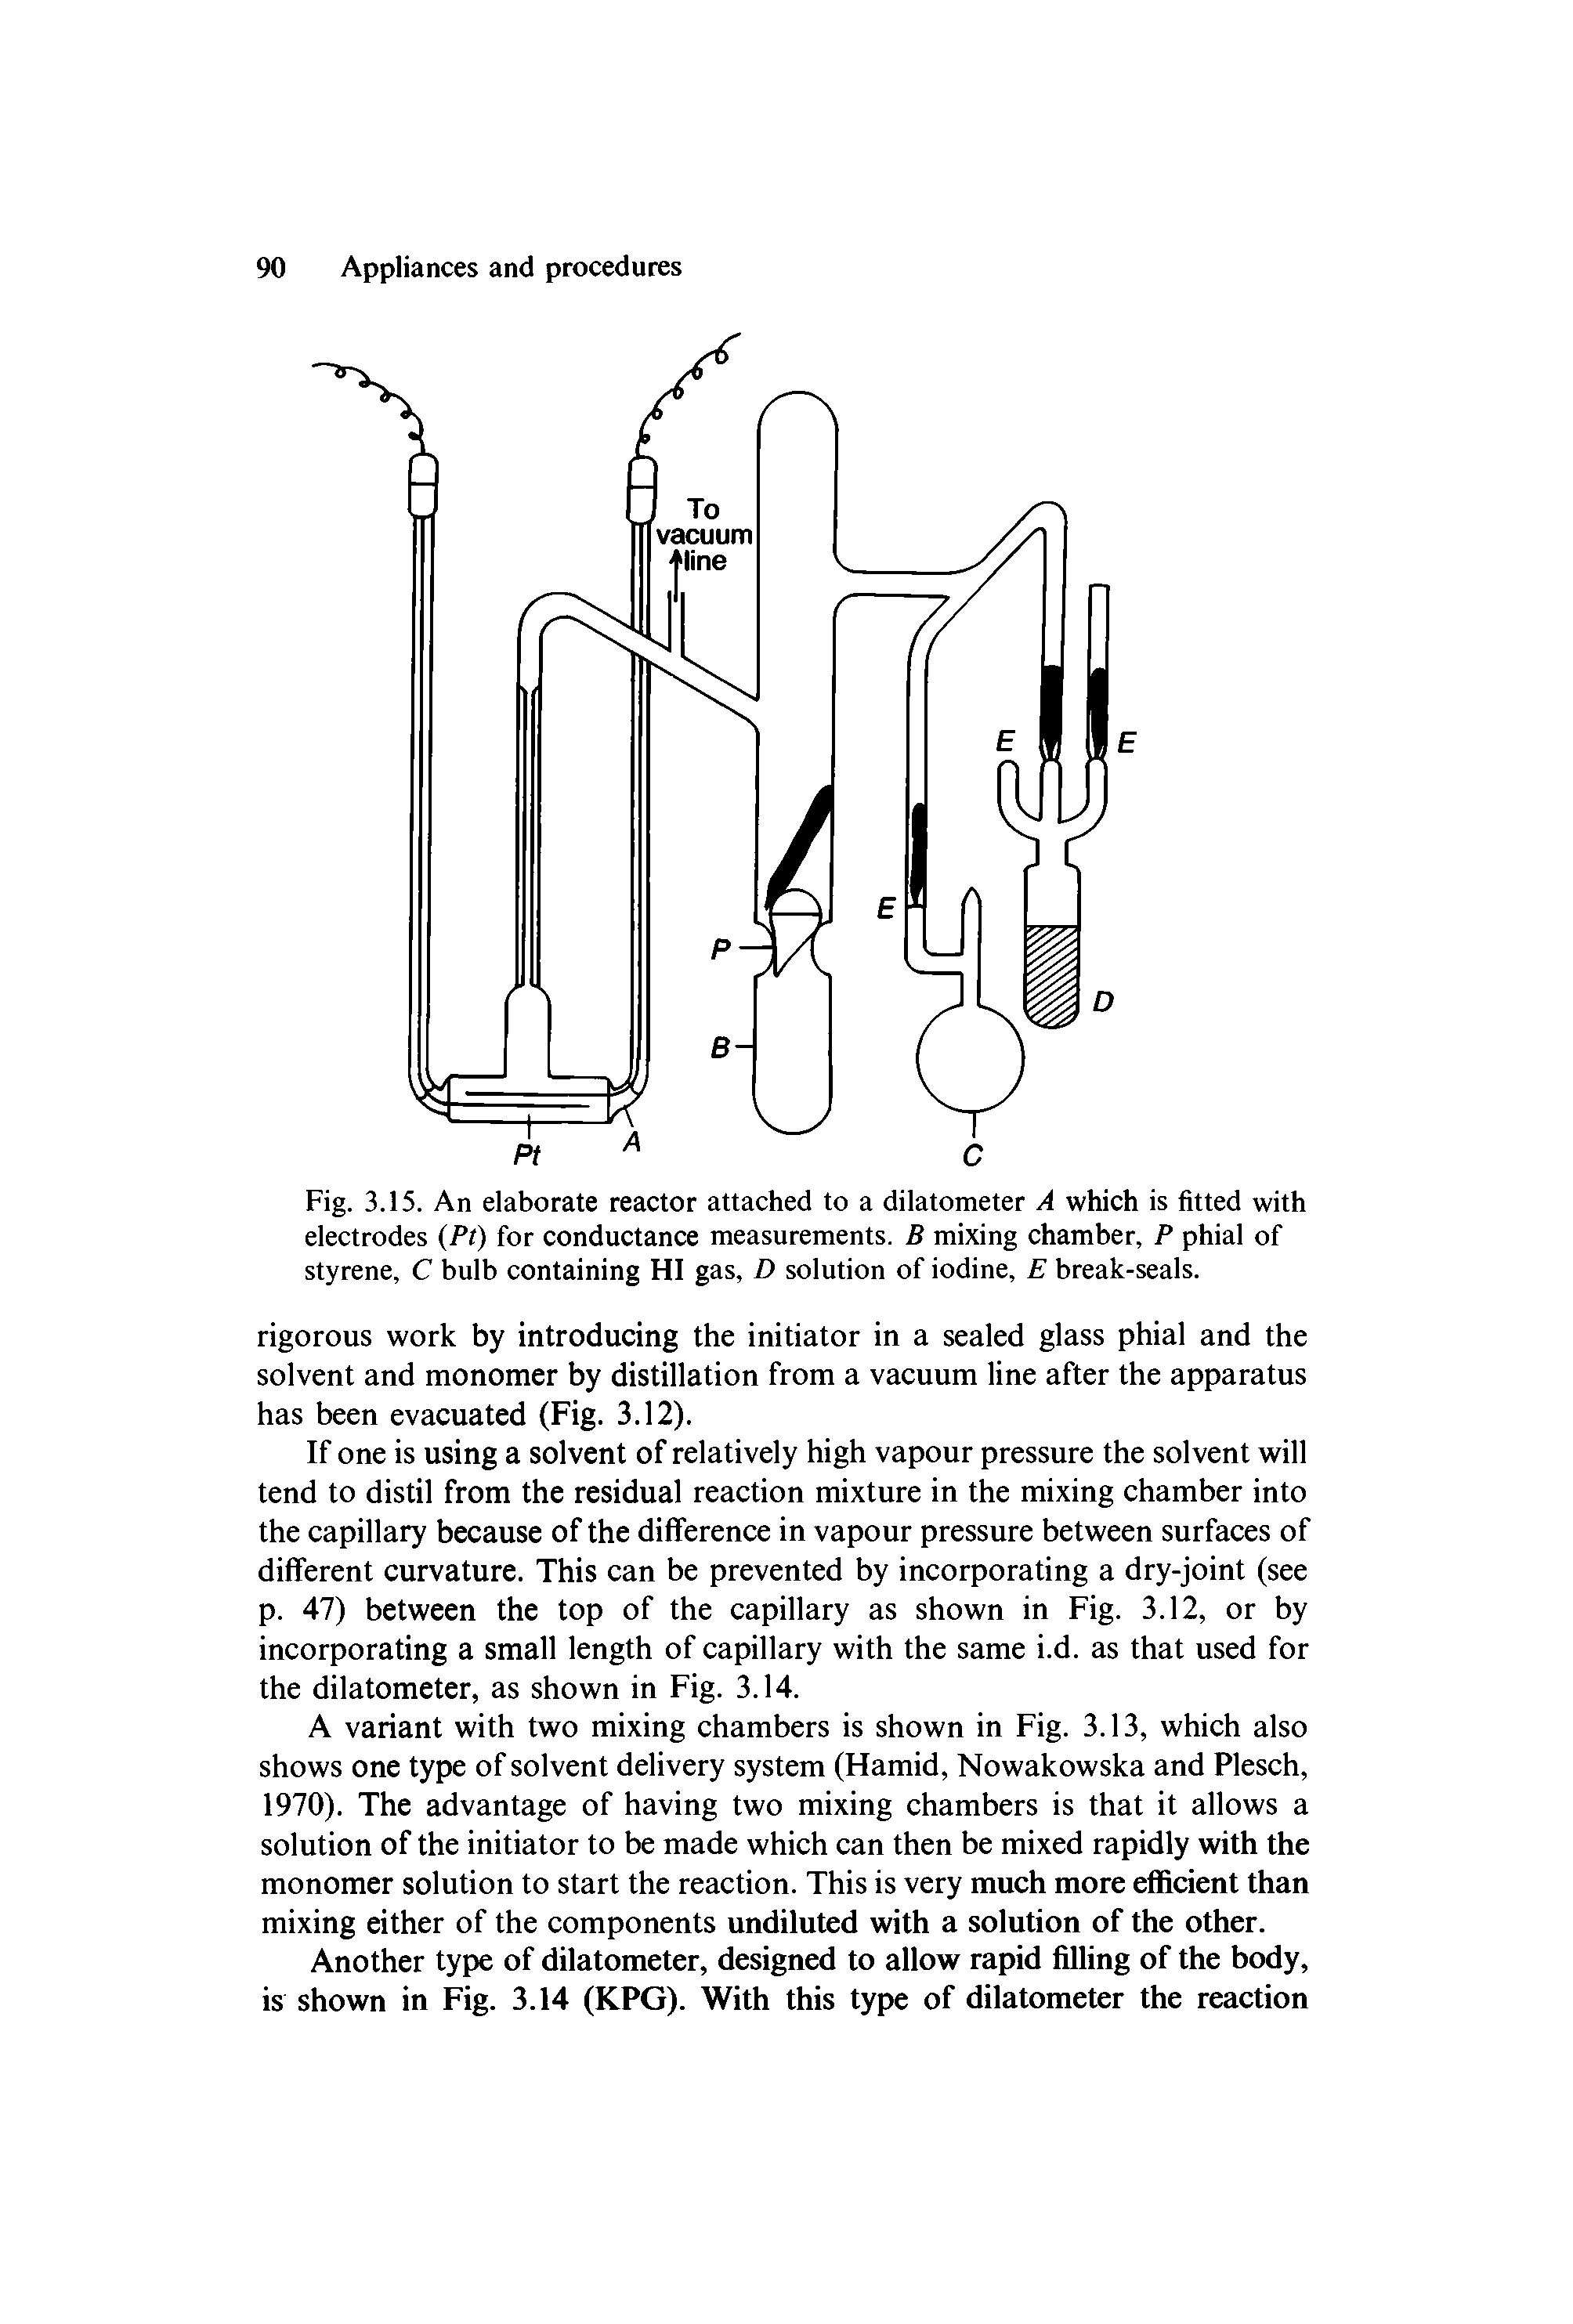 Fig. 3.15. An elaborate reactor attached to a dilatometer A which is fitted with electrodes (Pt) for conductance measurements. B mixing chamber, P phial of styrene, C bulb containing HI gas, D solution of iodine, E break-seals.